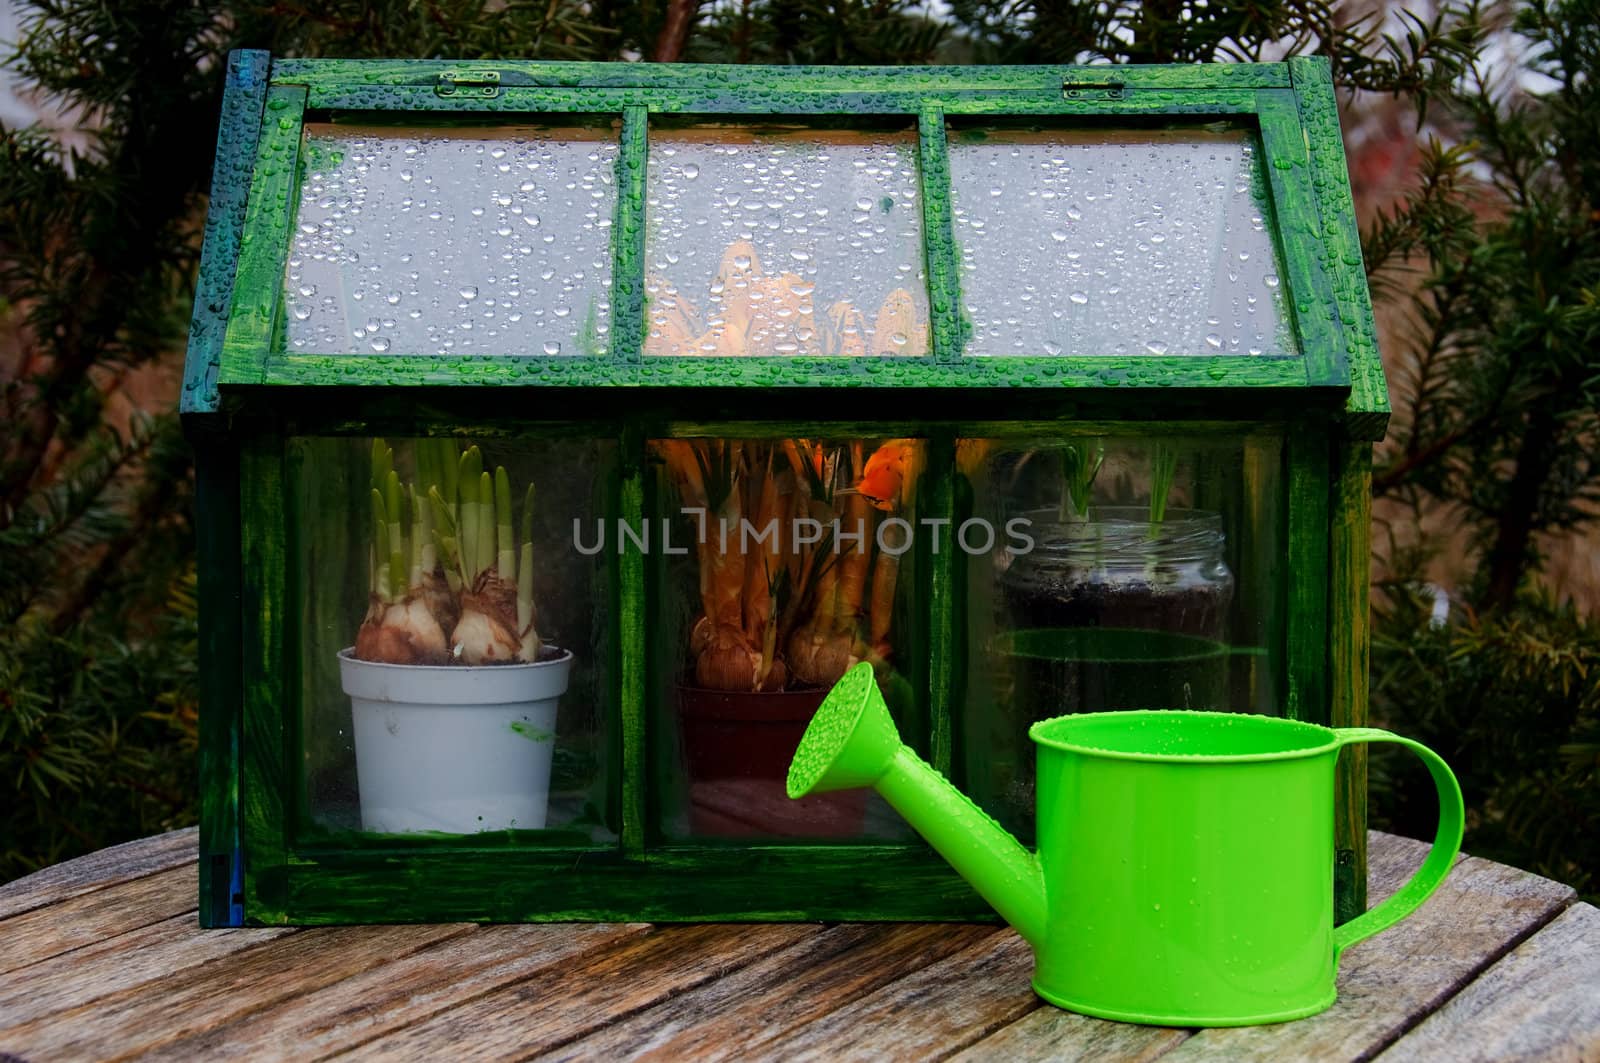 Mini greenhouse and watering can by GryT